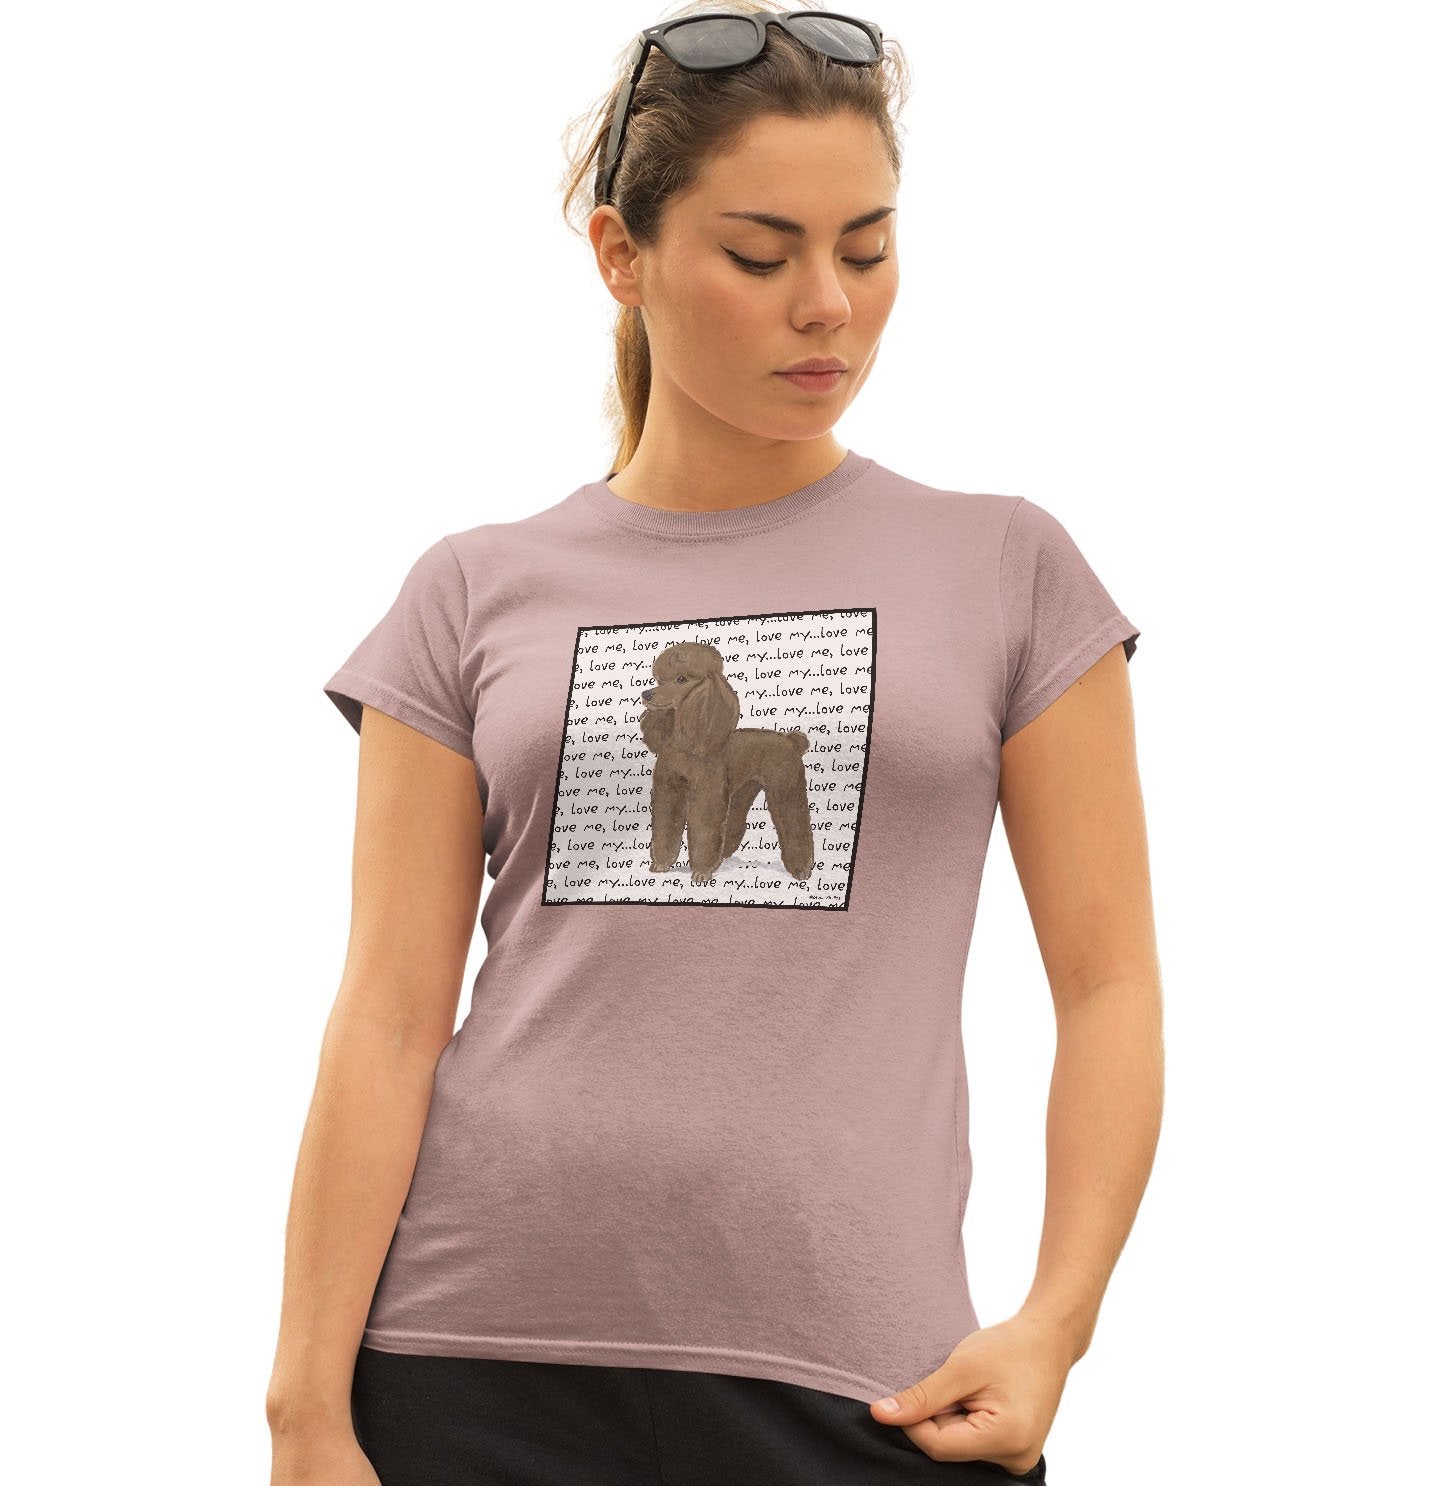 Animal Pride - Brown Poodle Love Text - Women's Fitted T-Shirt